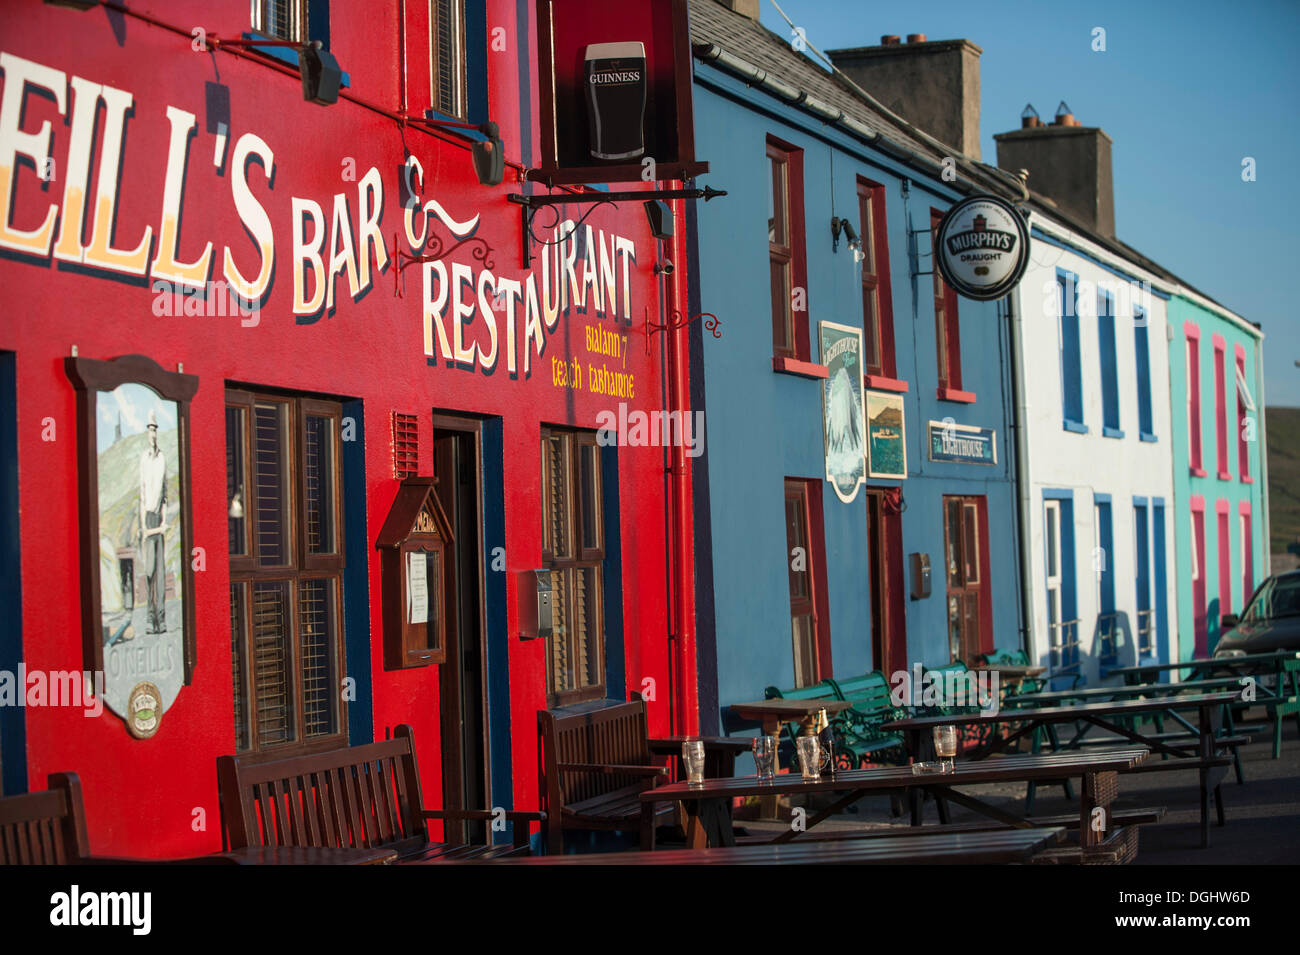 Colorful row of houses with O'Neill's Restaurant, Allihies, Ring of Beara, Ireland, Europe Stock Photo